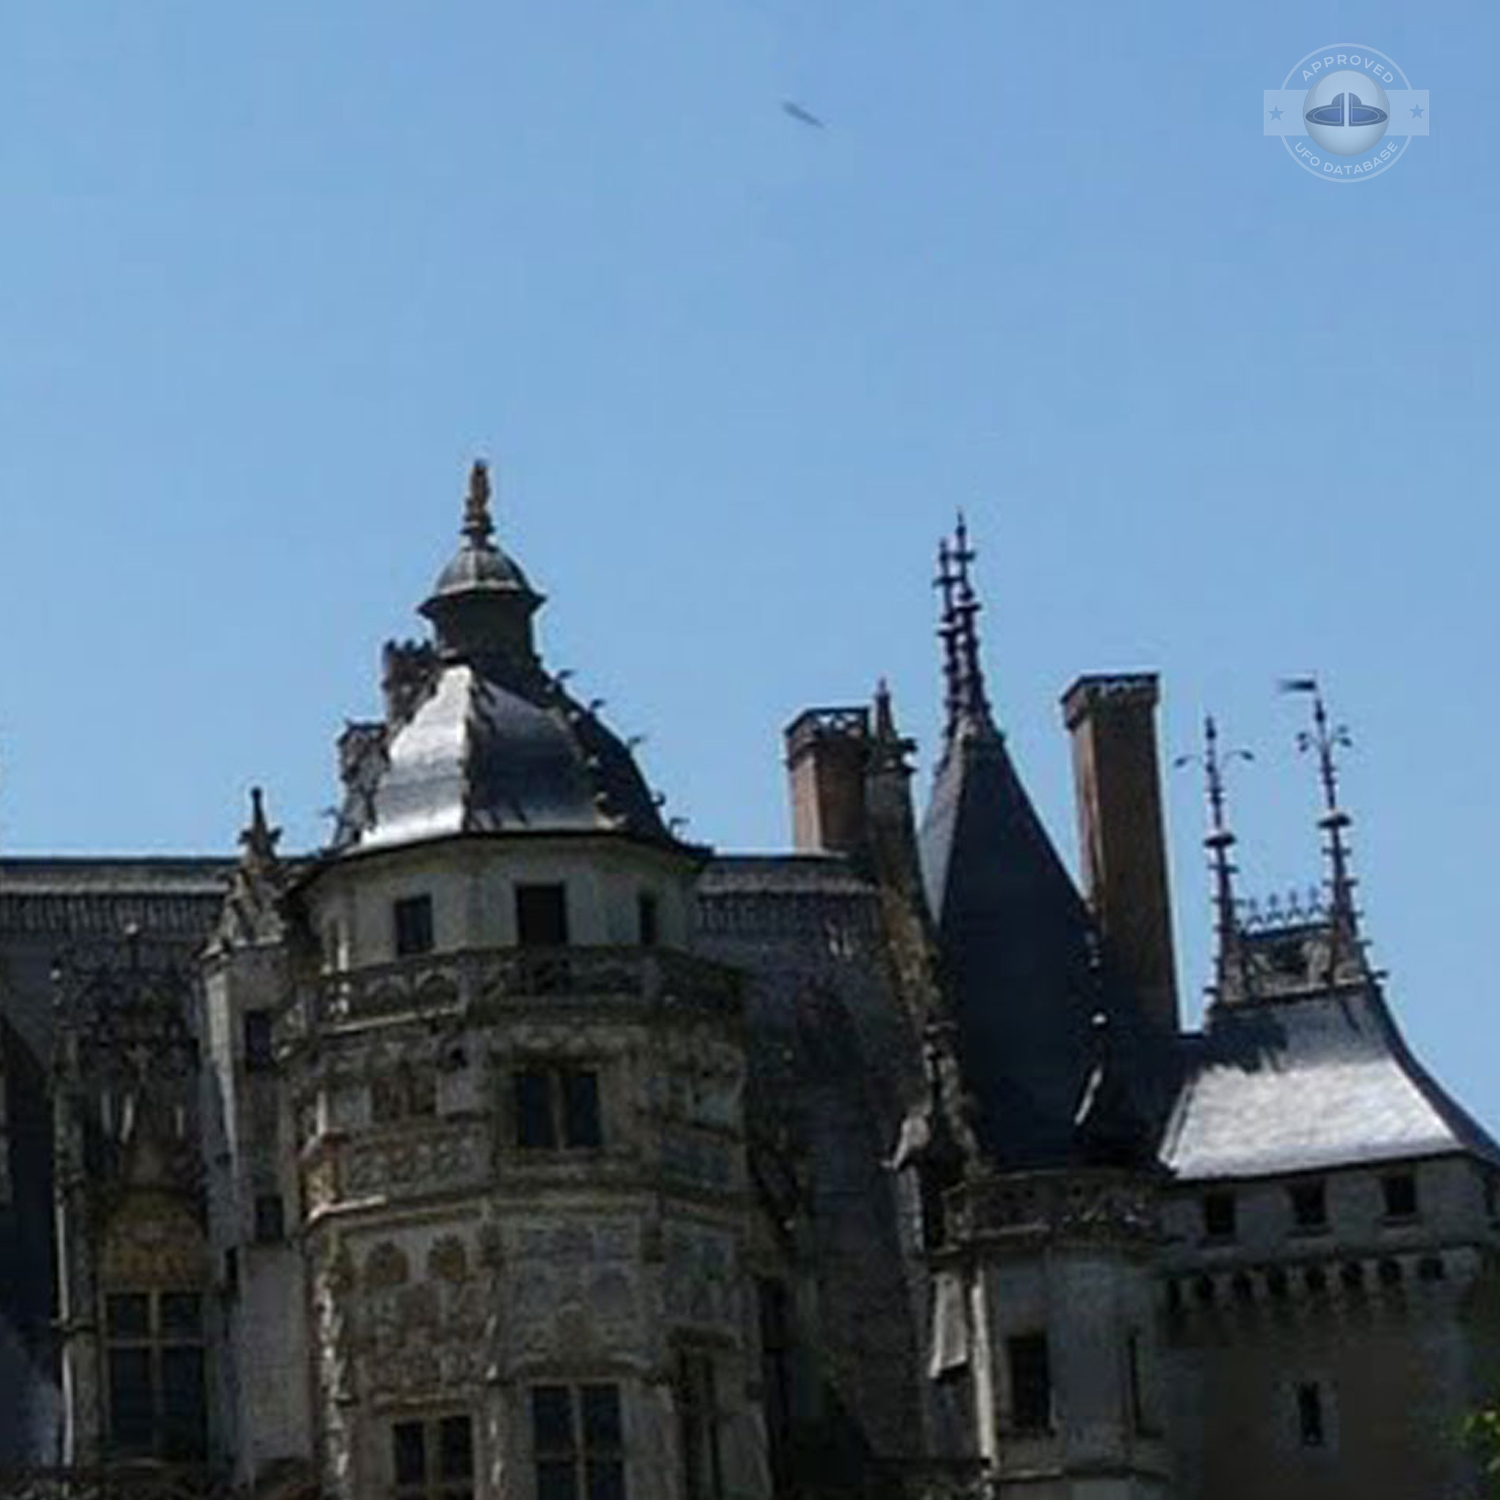 France Castle in Meillant Cher department - UFO picture July 11 2010 UFO Picture #239-2